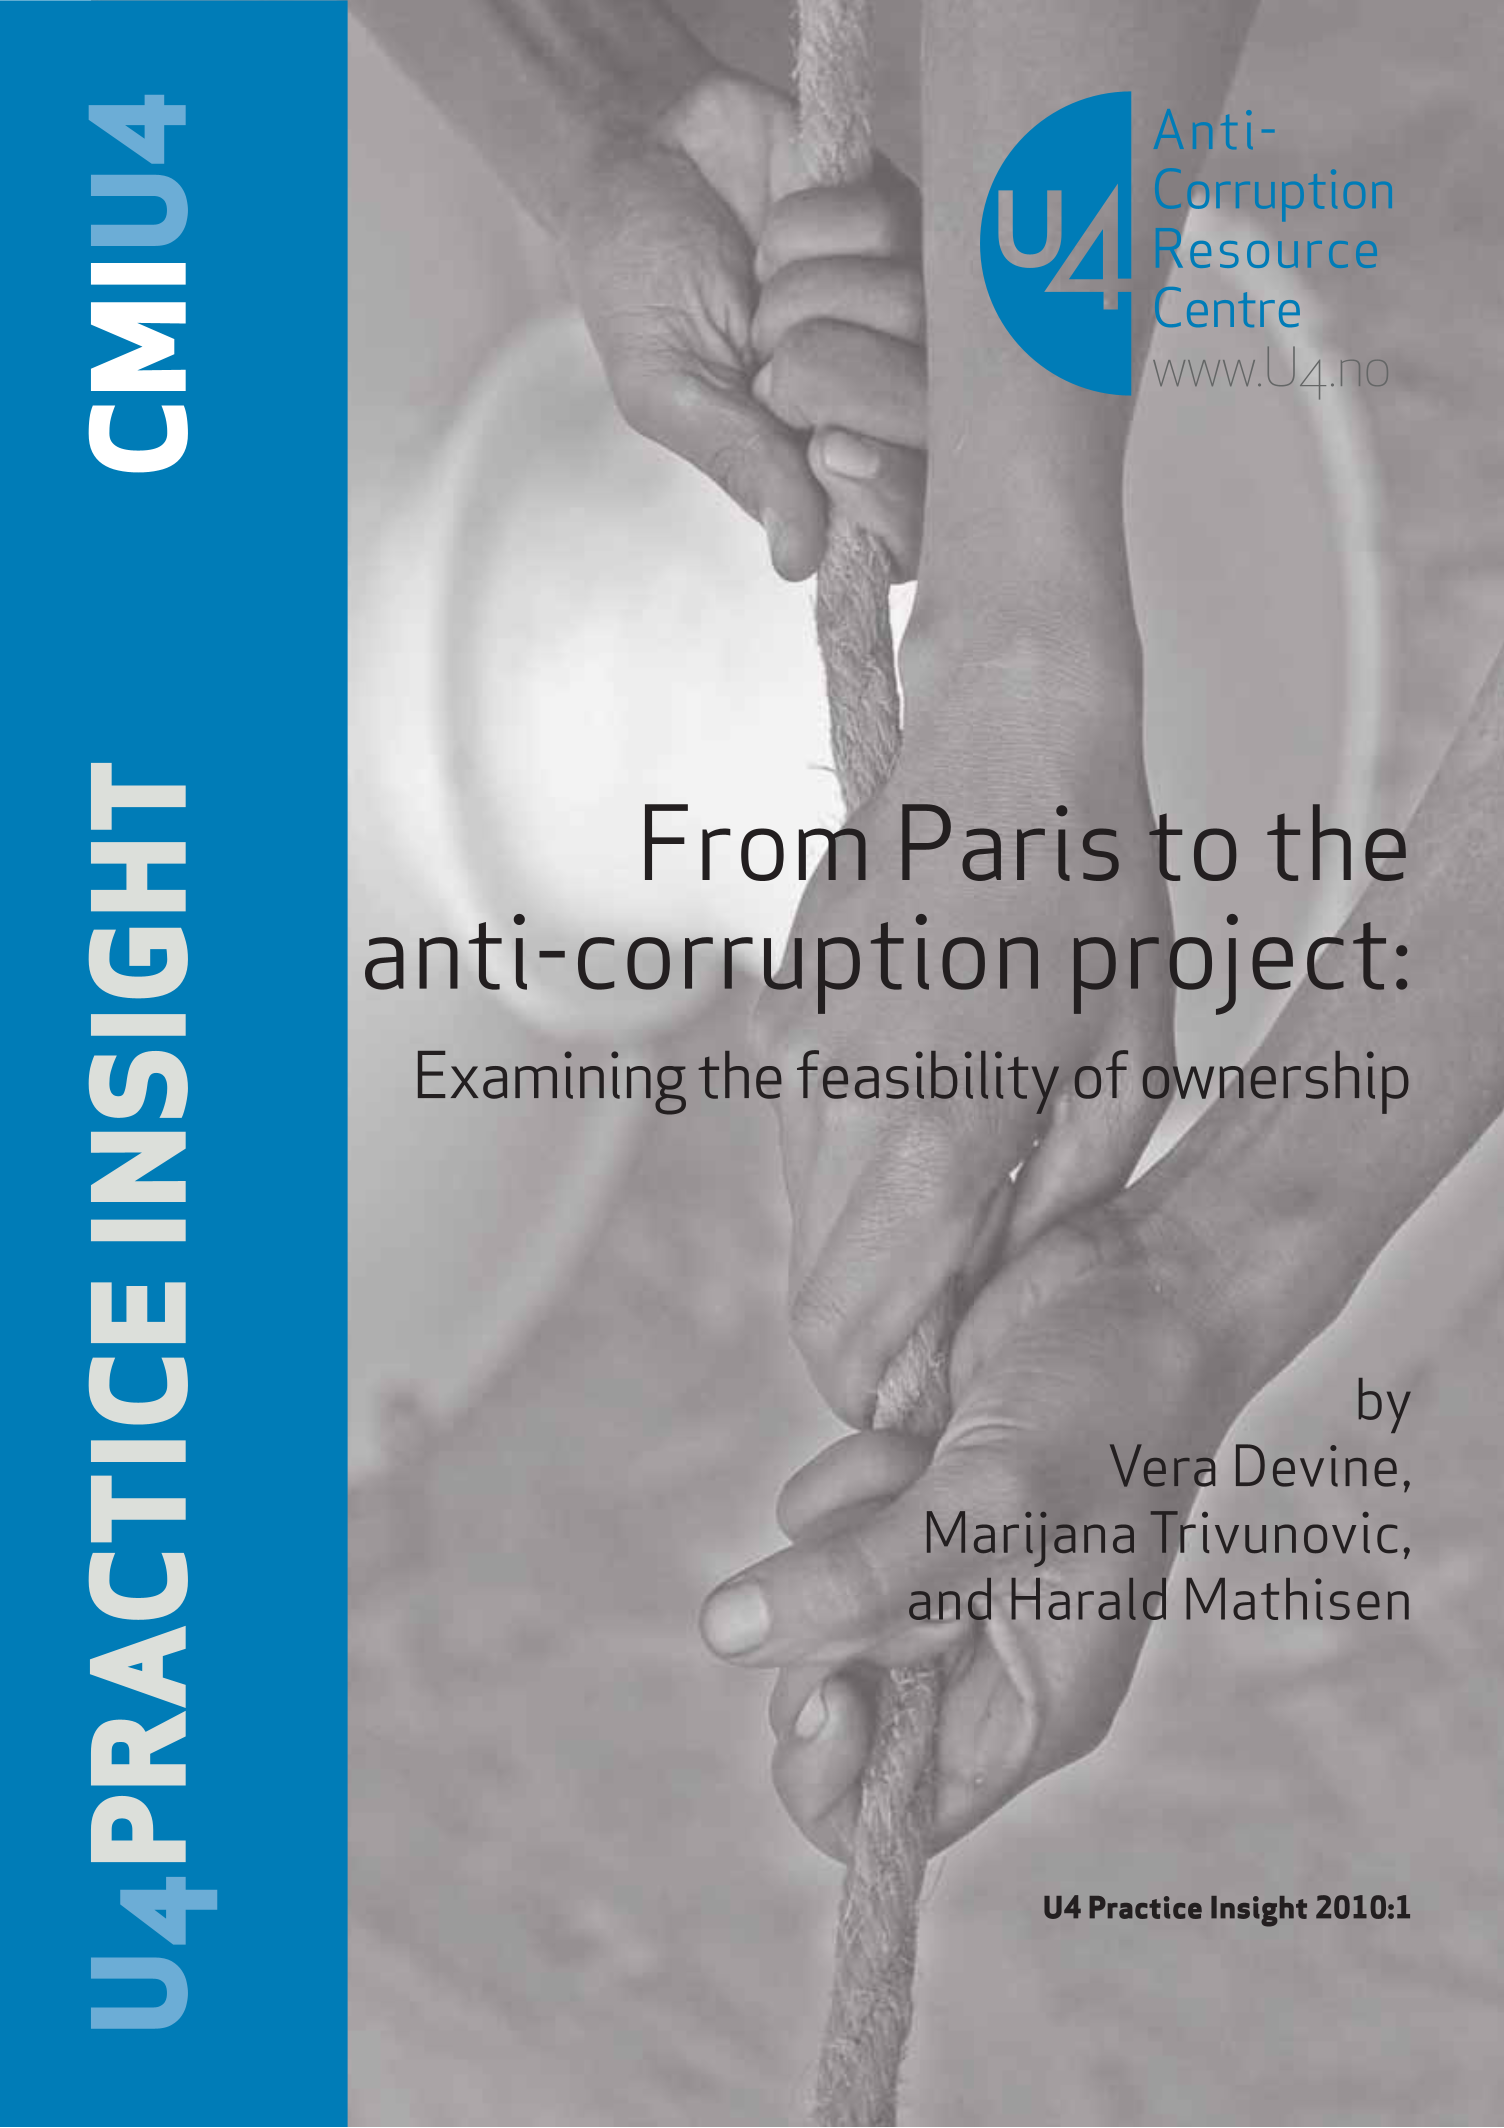 From Paris to the anti-corruption project: Examining the feasibility of ownership